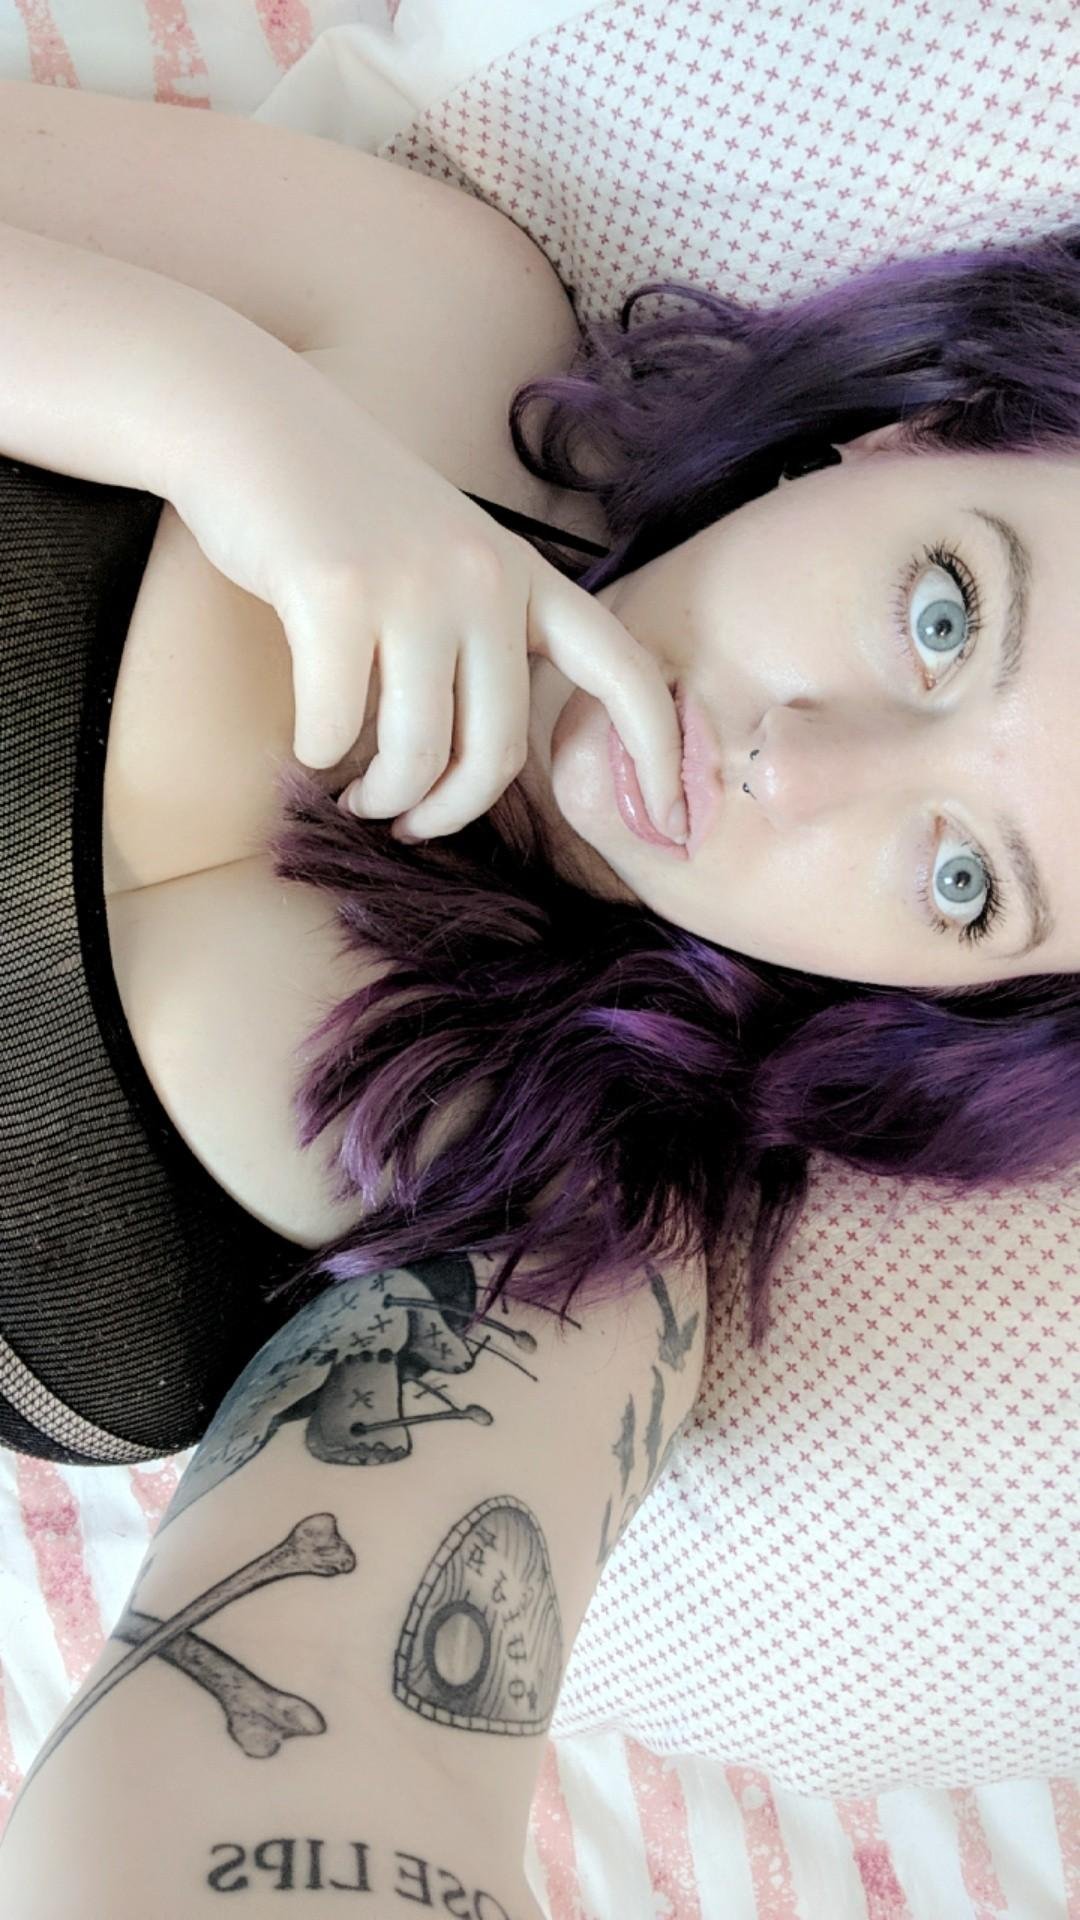 Thought I'd show off my purple locks and a slight glimpse of nip.